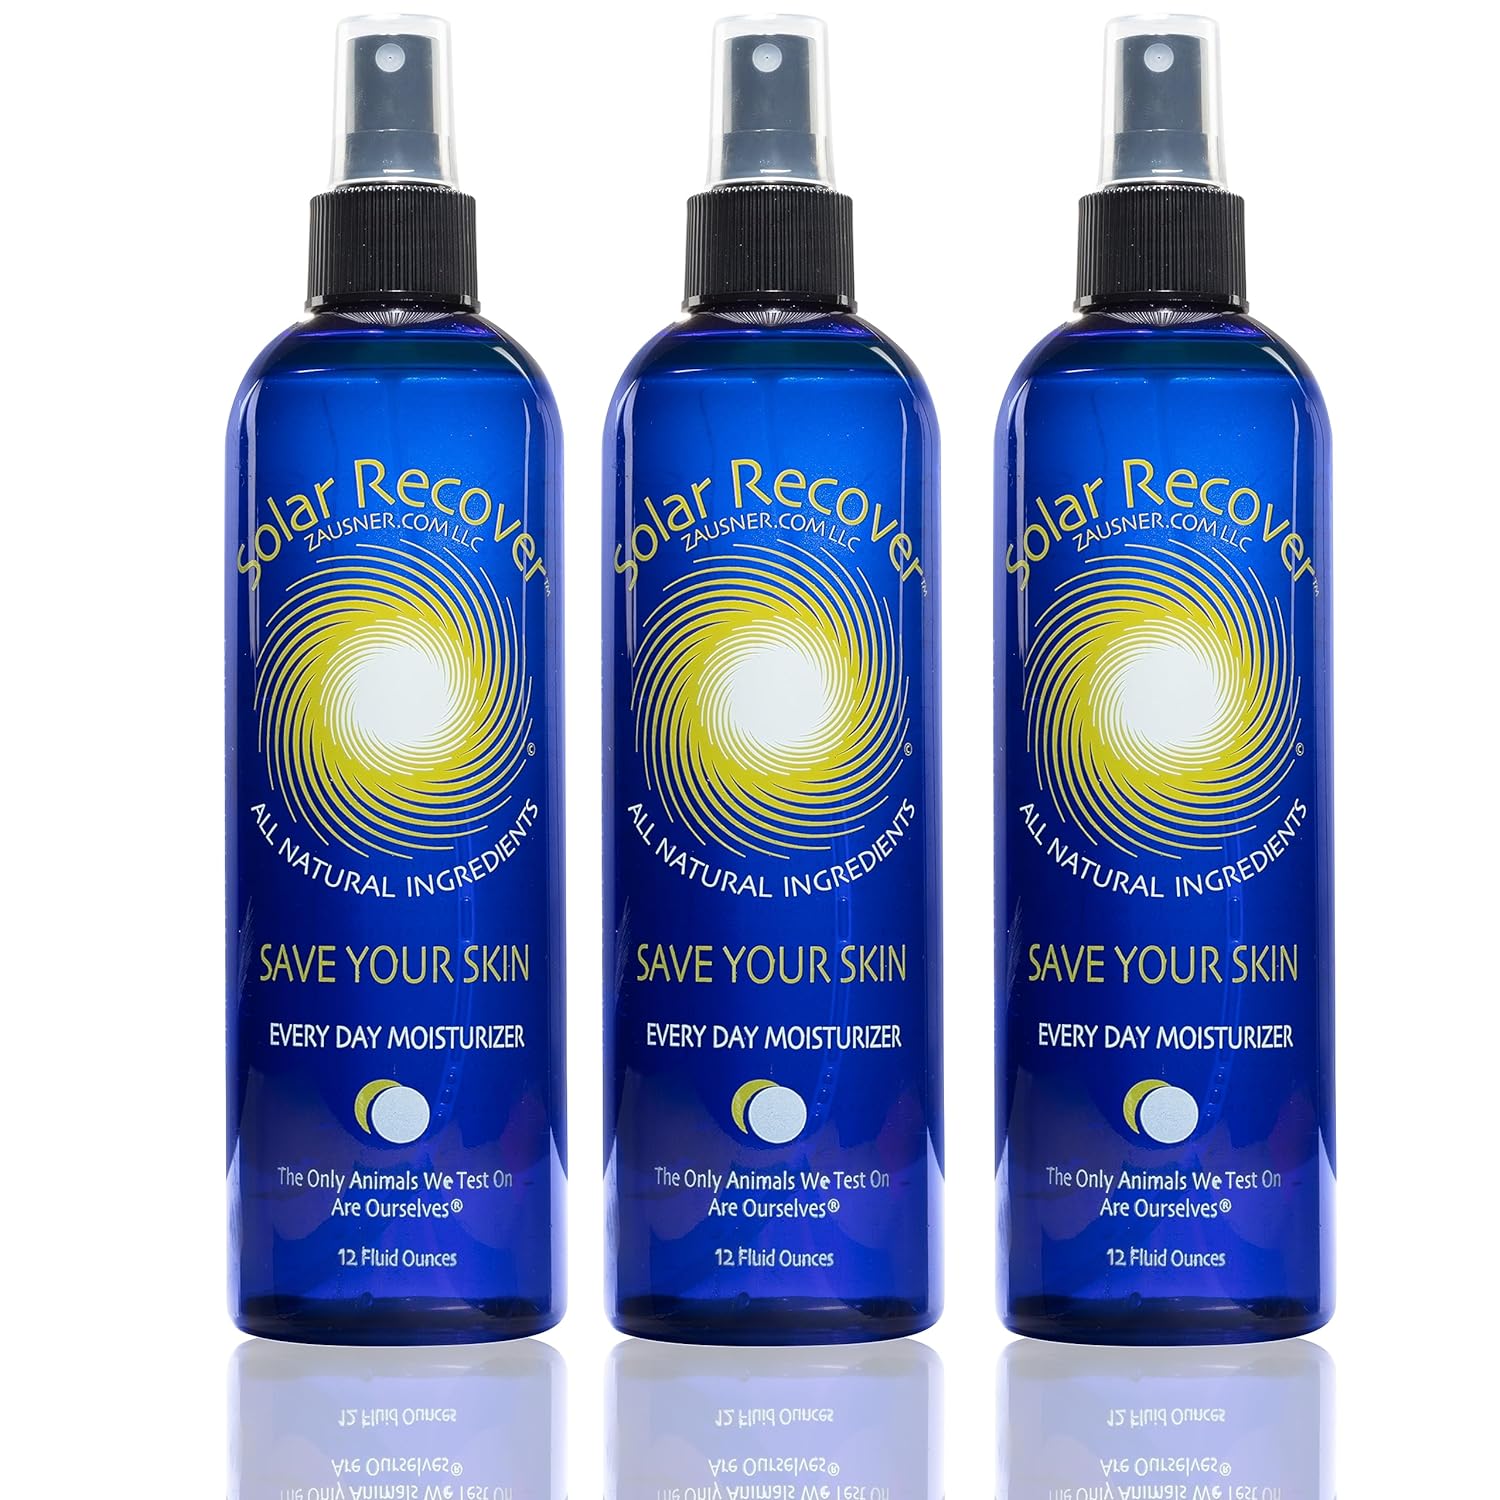 Solar Recover After Sun Moisturizing Spray 3 Pack (12 Ounce Each) - Hydrating Facial & Body Mist - 2460 Sprays of Sunburn Relief With Vitamin E & Calendula - Lotion Delivered in Water For Healthy Skin